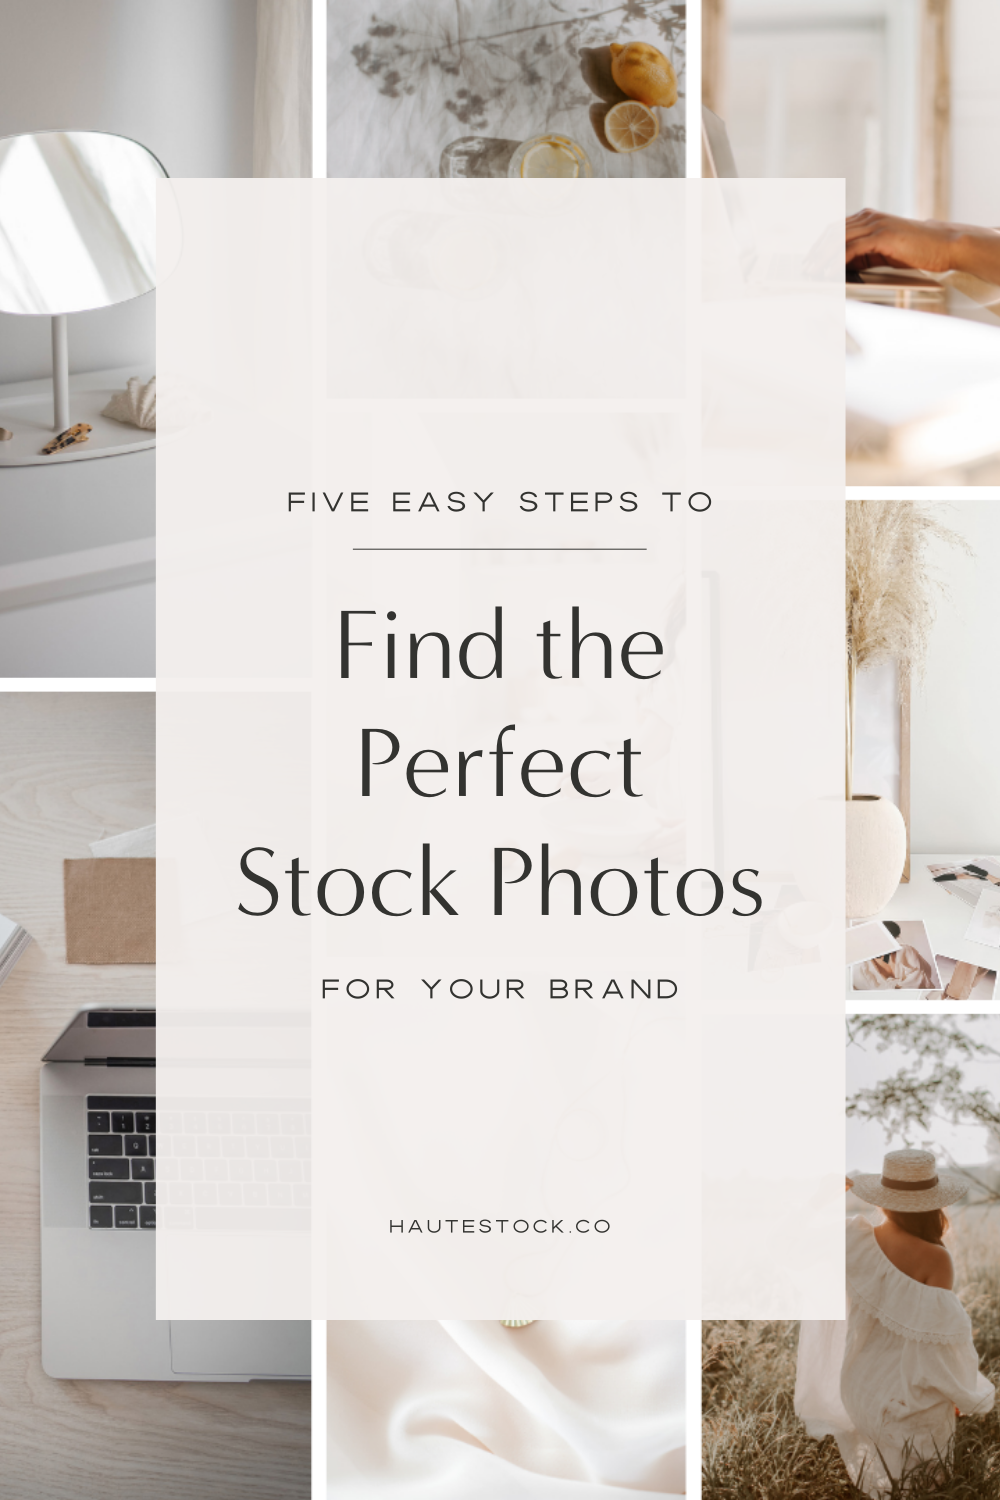 Finding the perfect stock photos for your brand doesn't have to be difficult or time consuming! Click to find out the five easy steps you need to find the perfect images for your website, social media, or online business marketing without the stress…